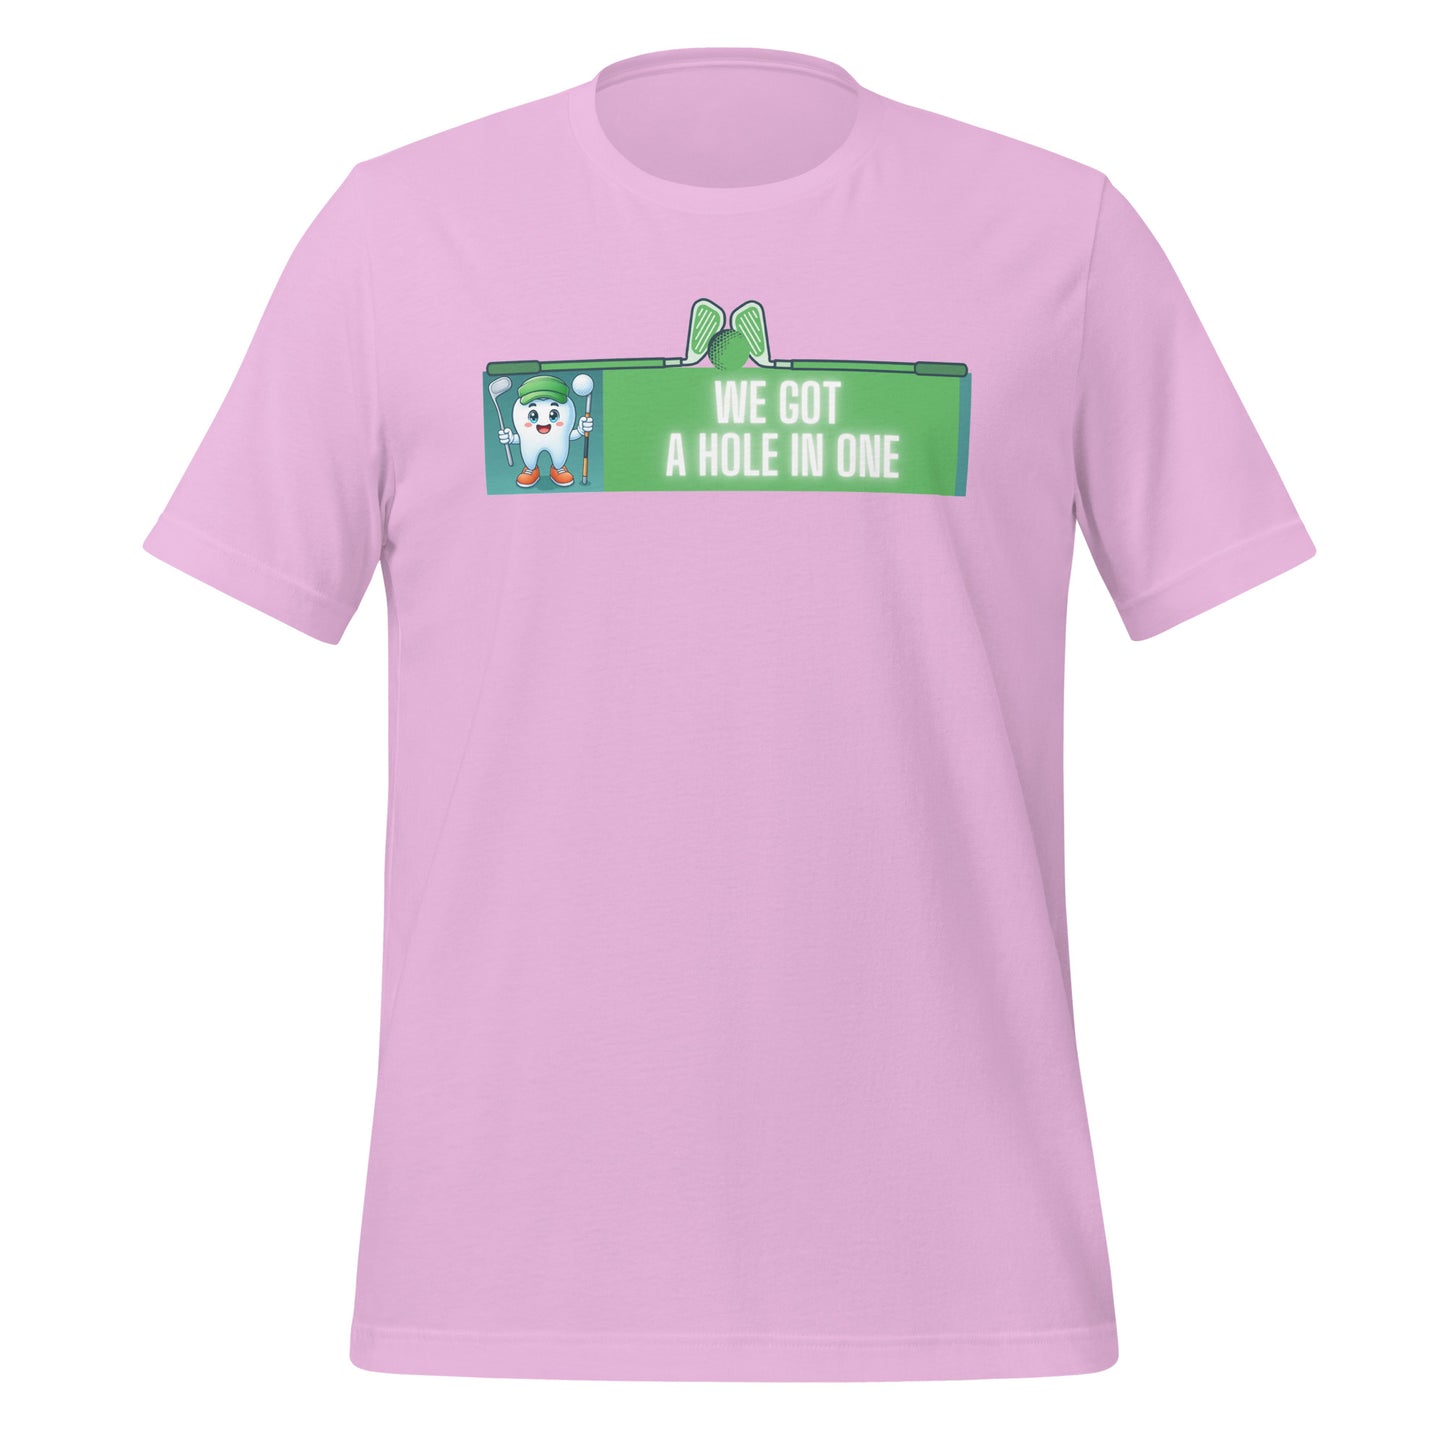 Cute dentist t-shirt showcasing an adorable tooth character in golf attire, joyfully celebrating a ‘hole in one’ achievement, perfect for dentist and dental professionals seeking unique and thematic dental apparel. Lilac color, front view.